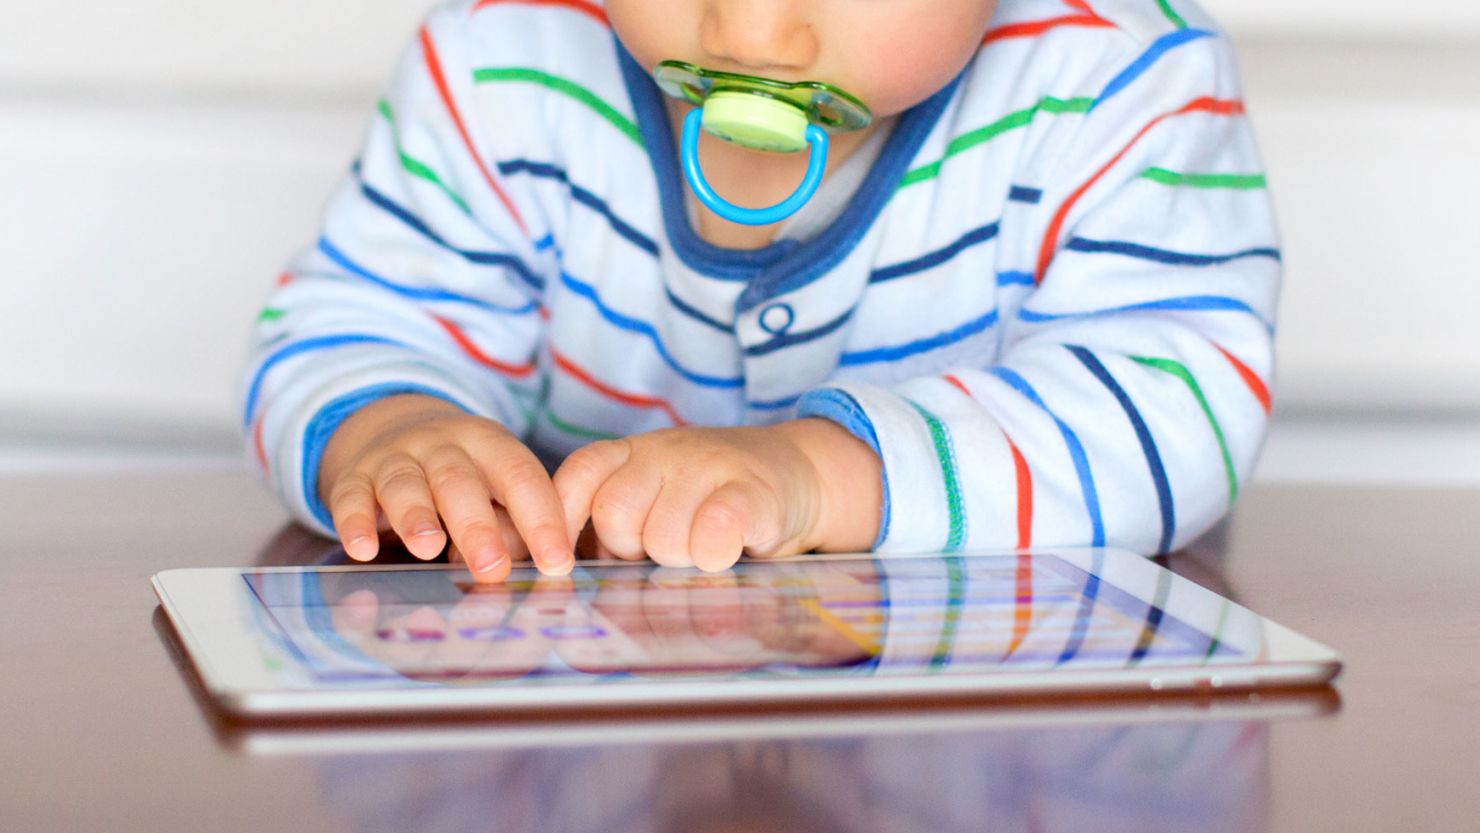 Screen time at age 1 has been linked with developmental delays in toddlerhood.